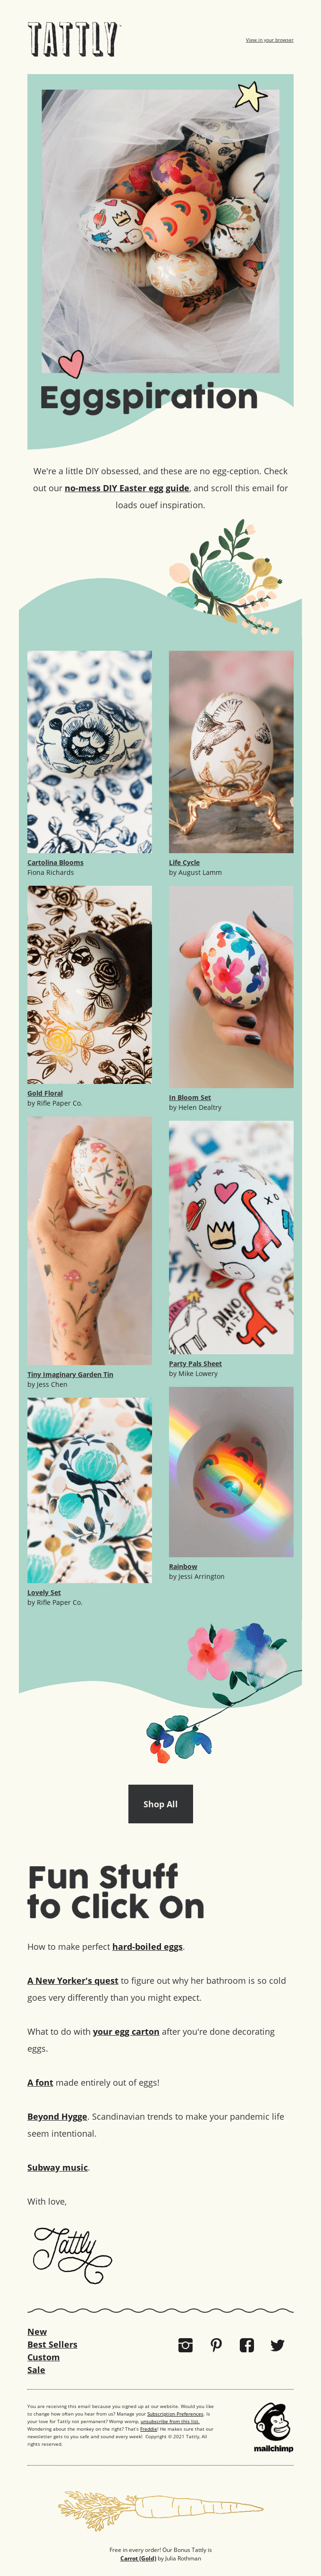 Easter Email Example by Tattly